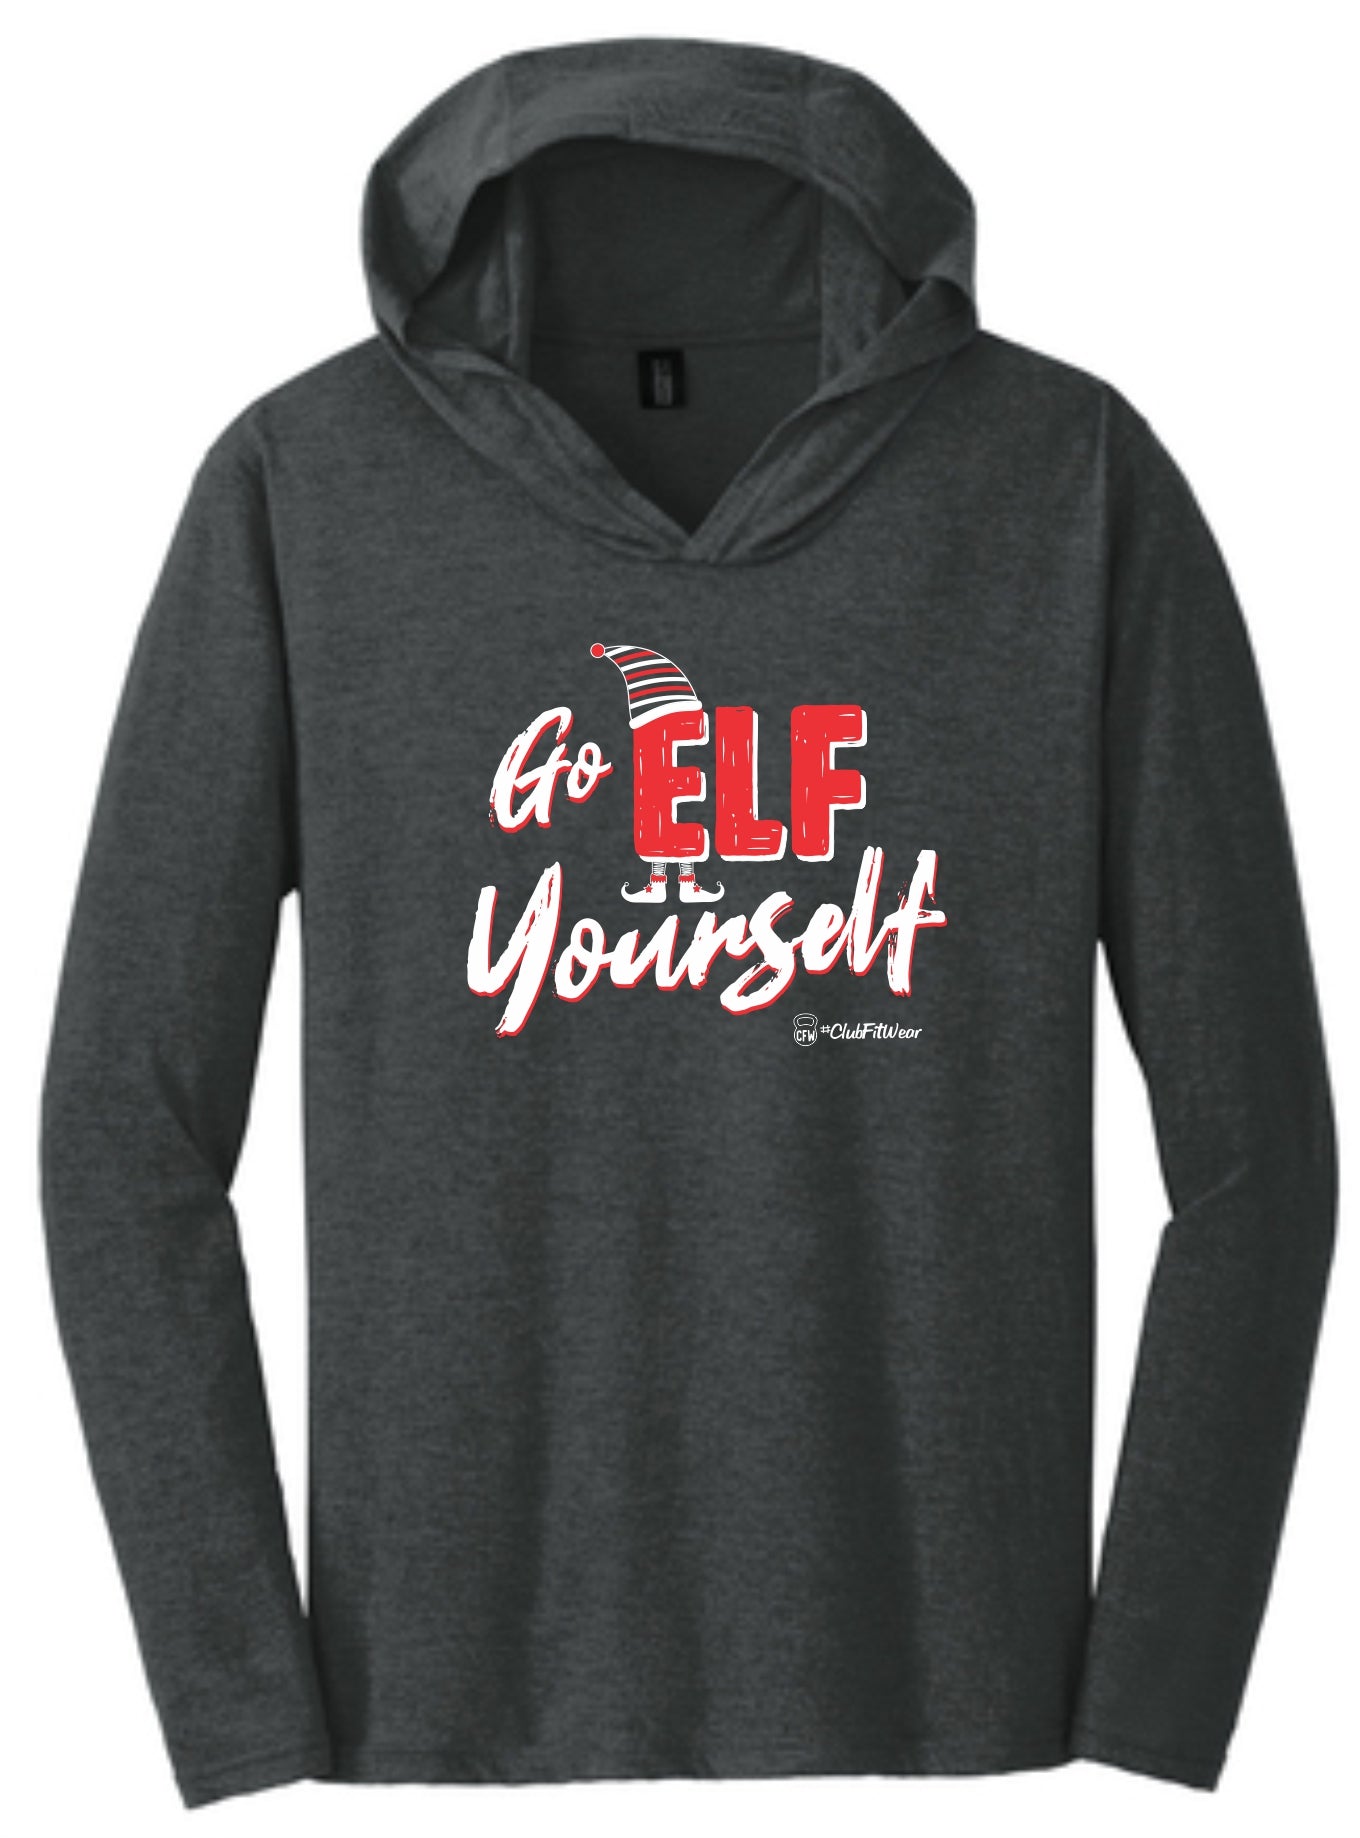 Go Elf Yourself - Hooded Pullover